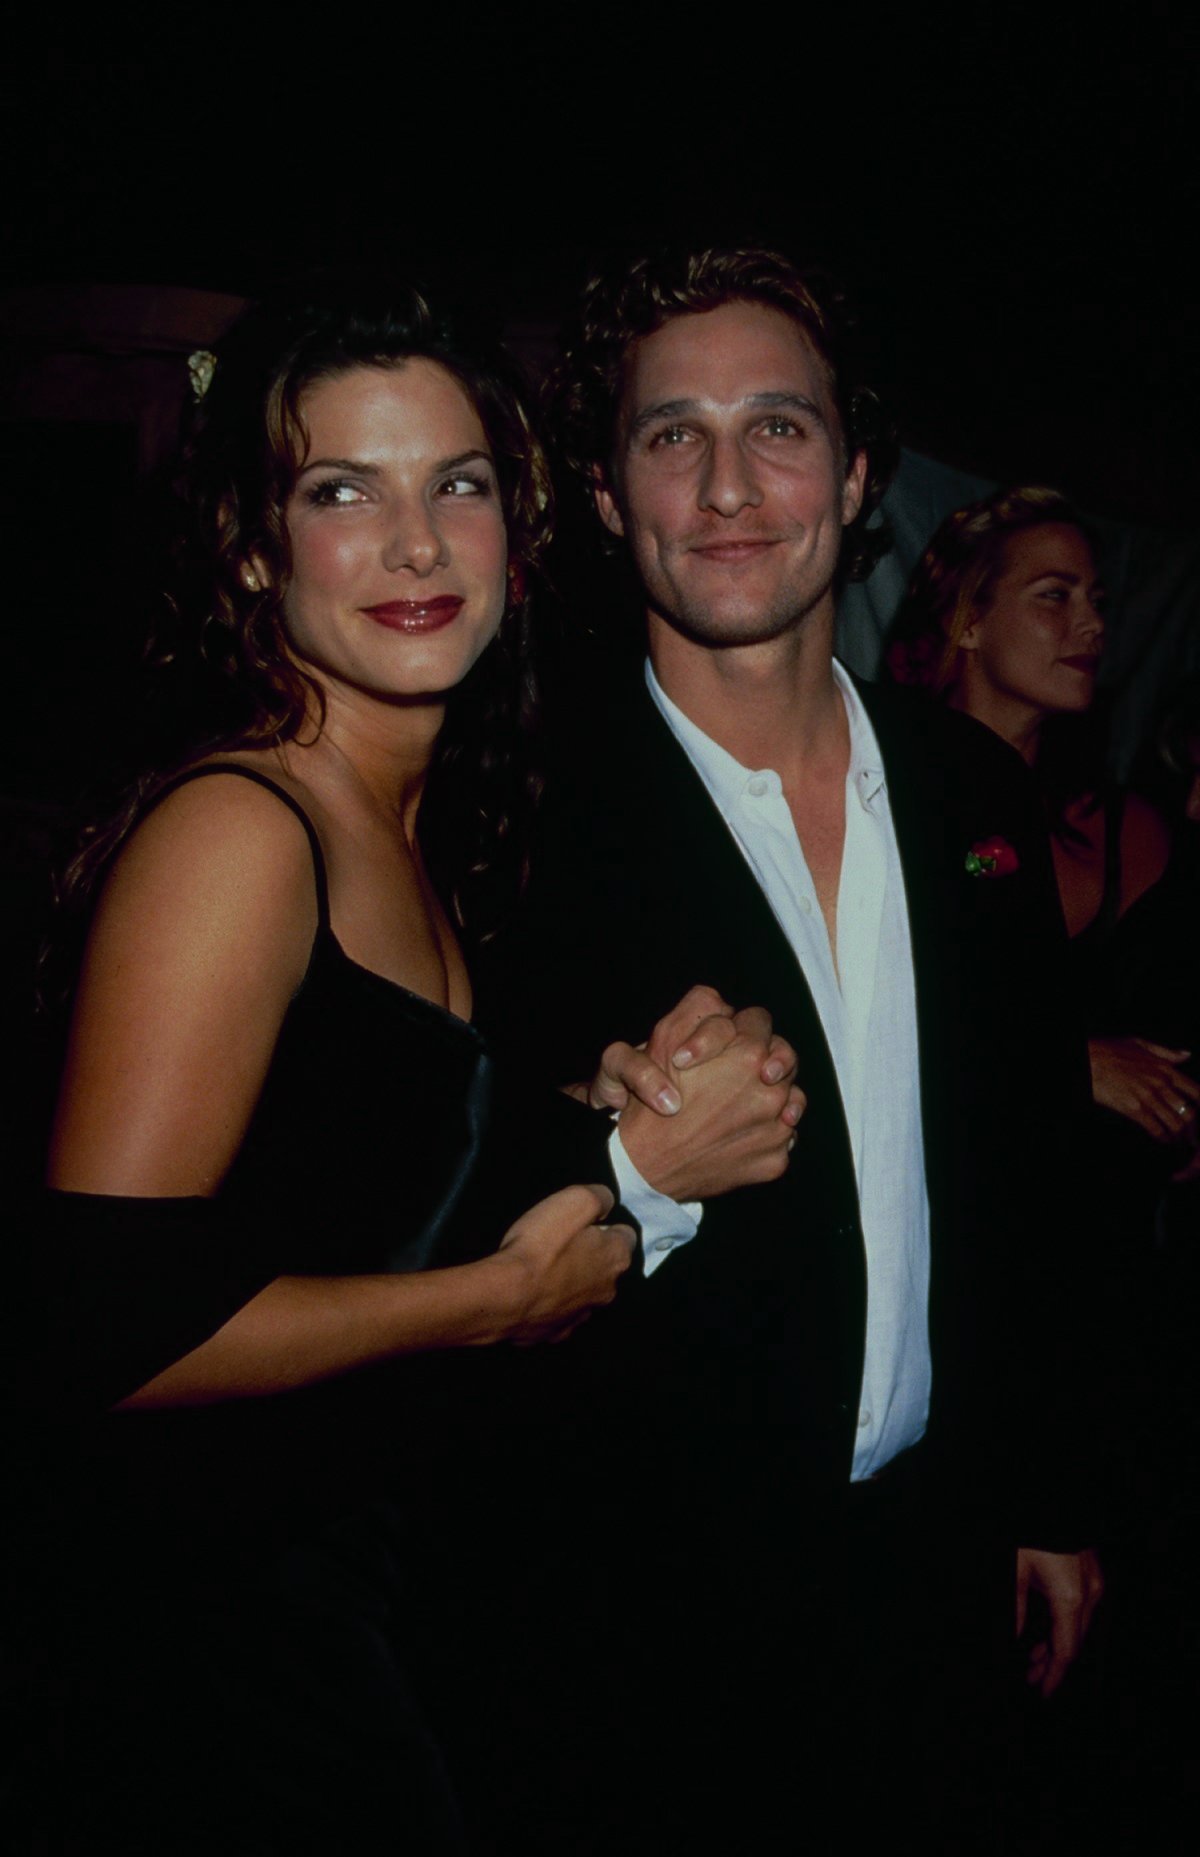 The Sweetest Thing Sandra Bullock Ever Said About Matthew McConaughey